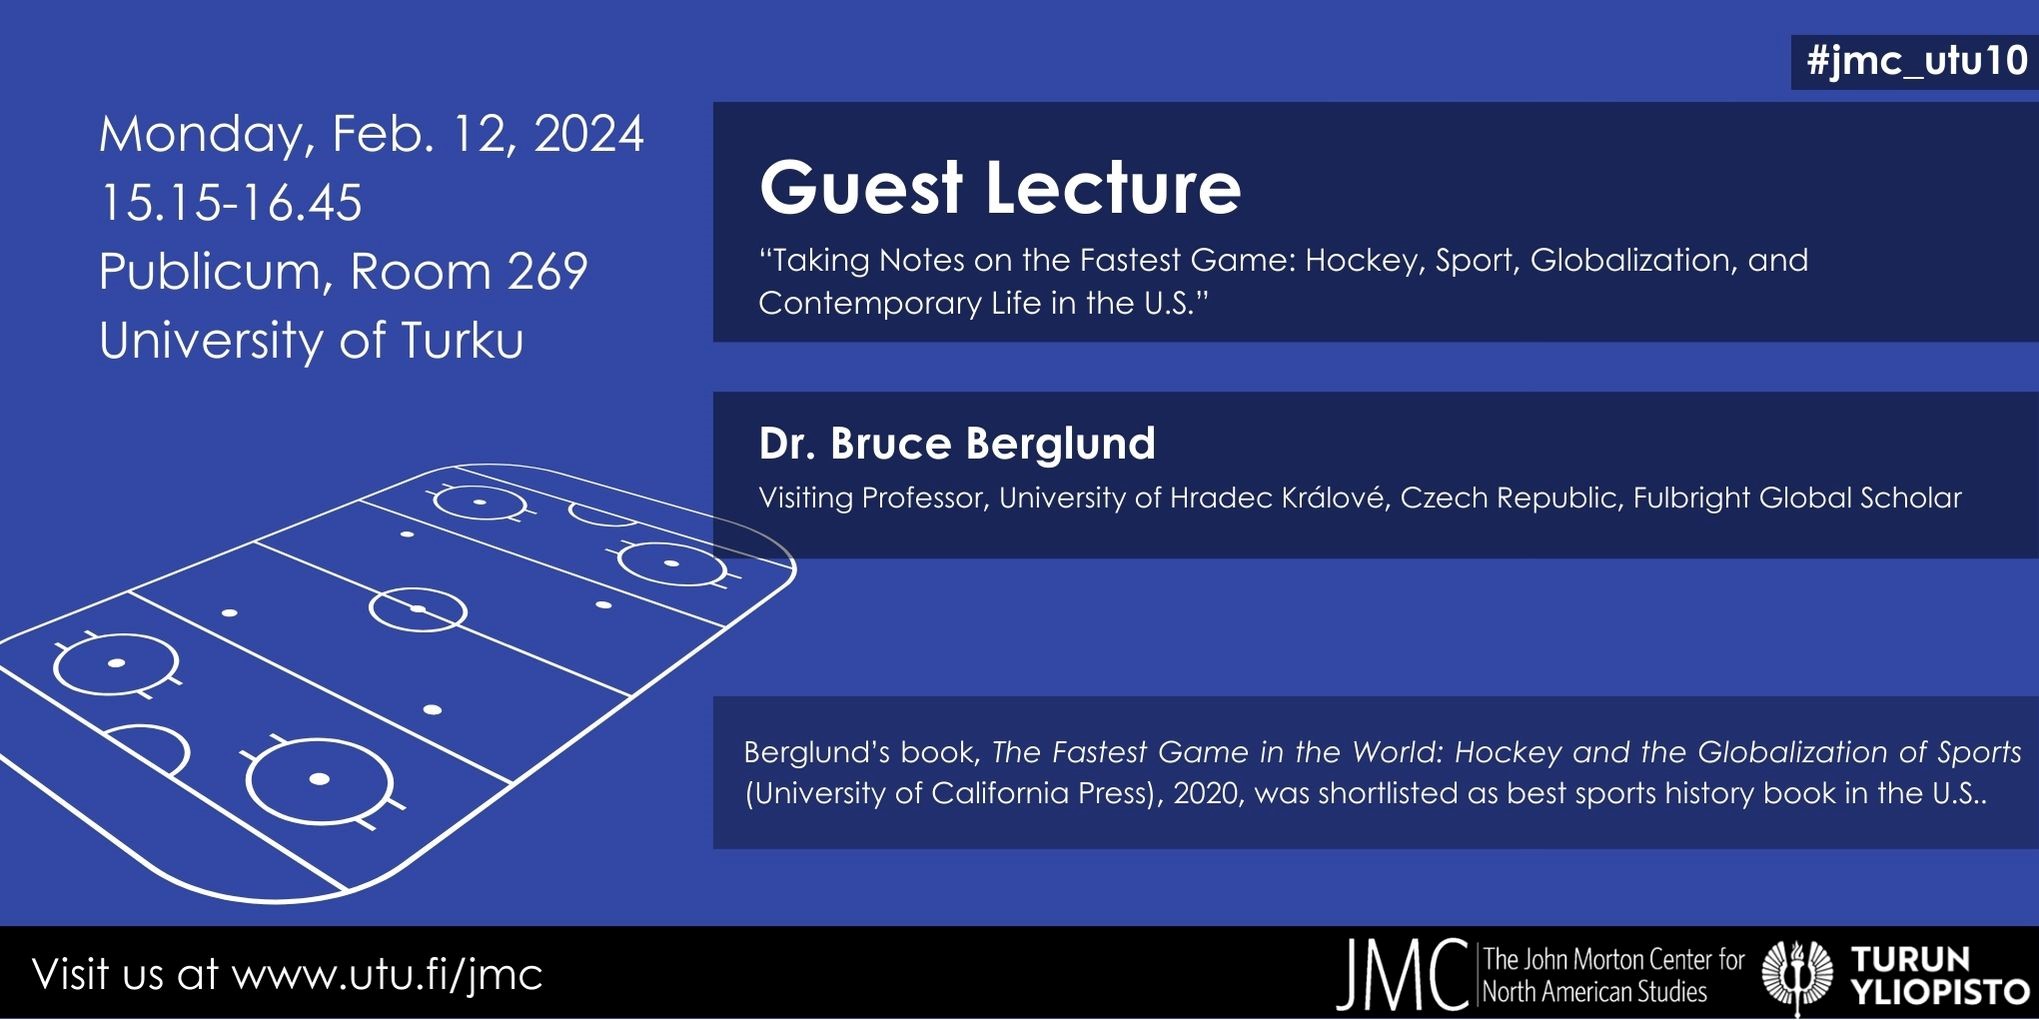 Dr. Bruce Berglund's guest lecture poster